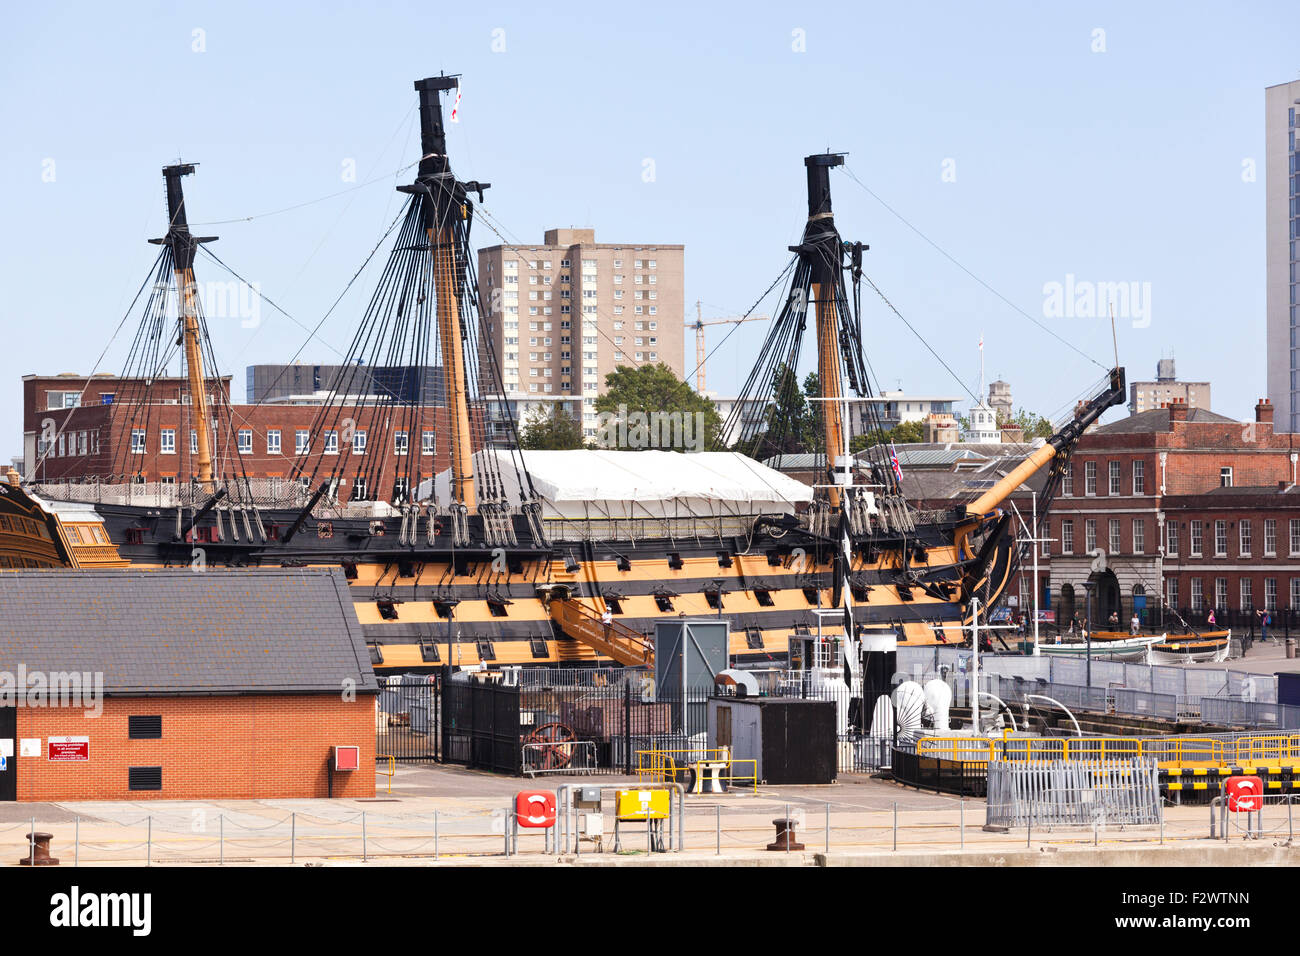 HMS Victory ( Lord Nelson's flagship at the Battle of Trafalgar in 1805) in Portsmouth Historic Dockyard, Portsmouth, Hampshire. Stock Photo